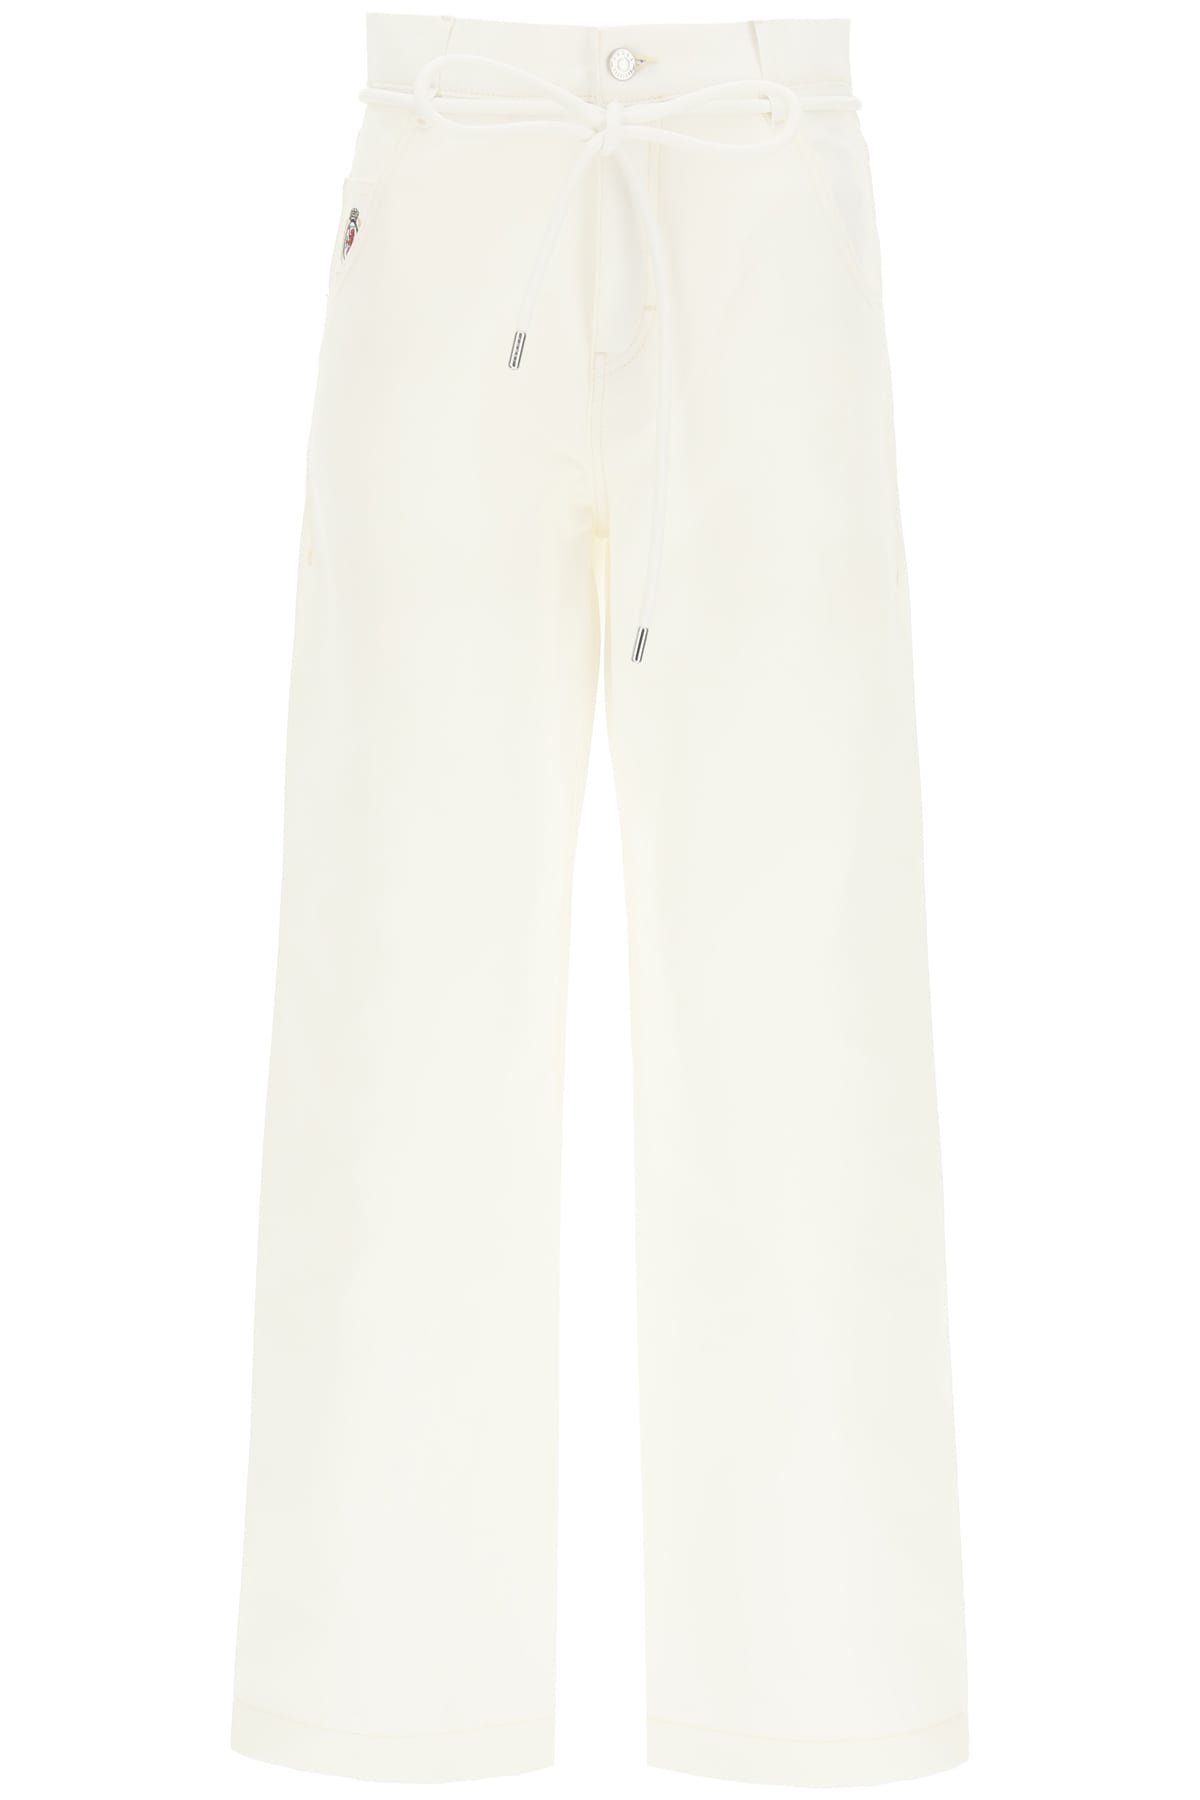 Tommy Hilfiger Carpenter Trousers